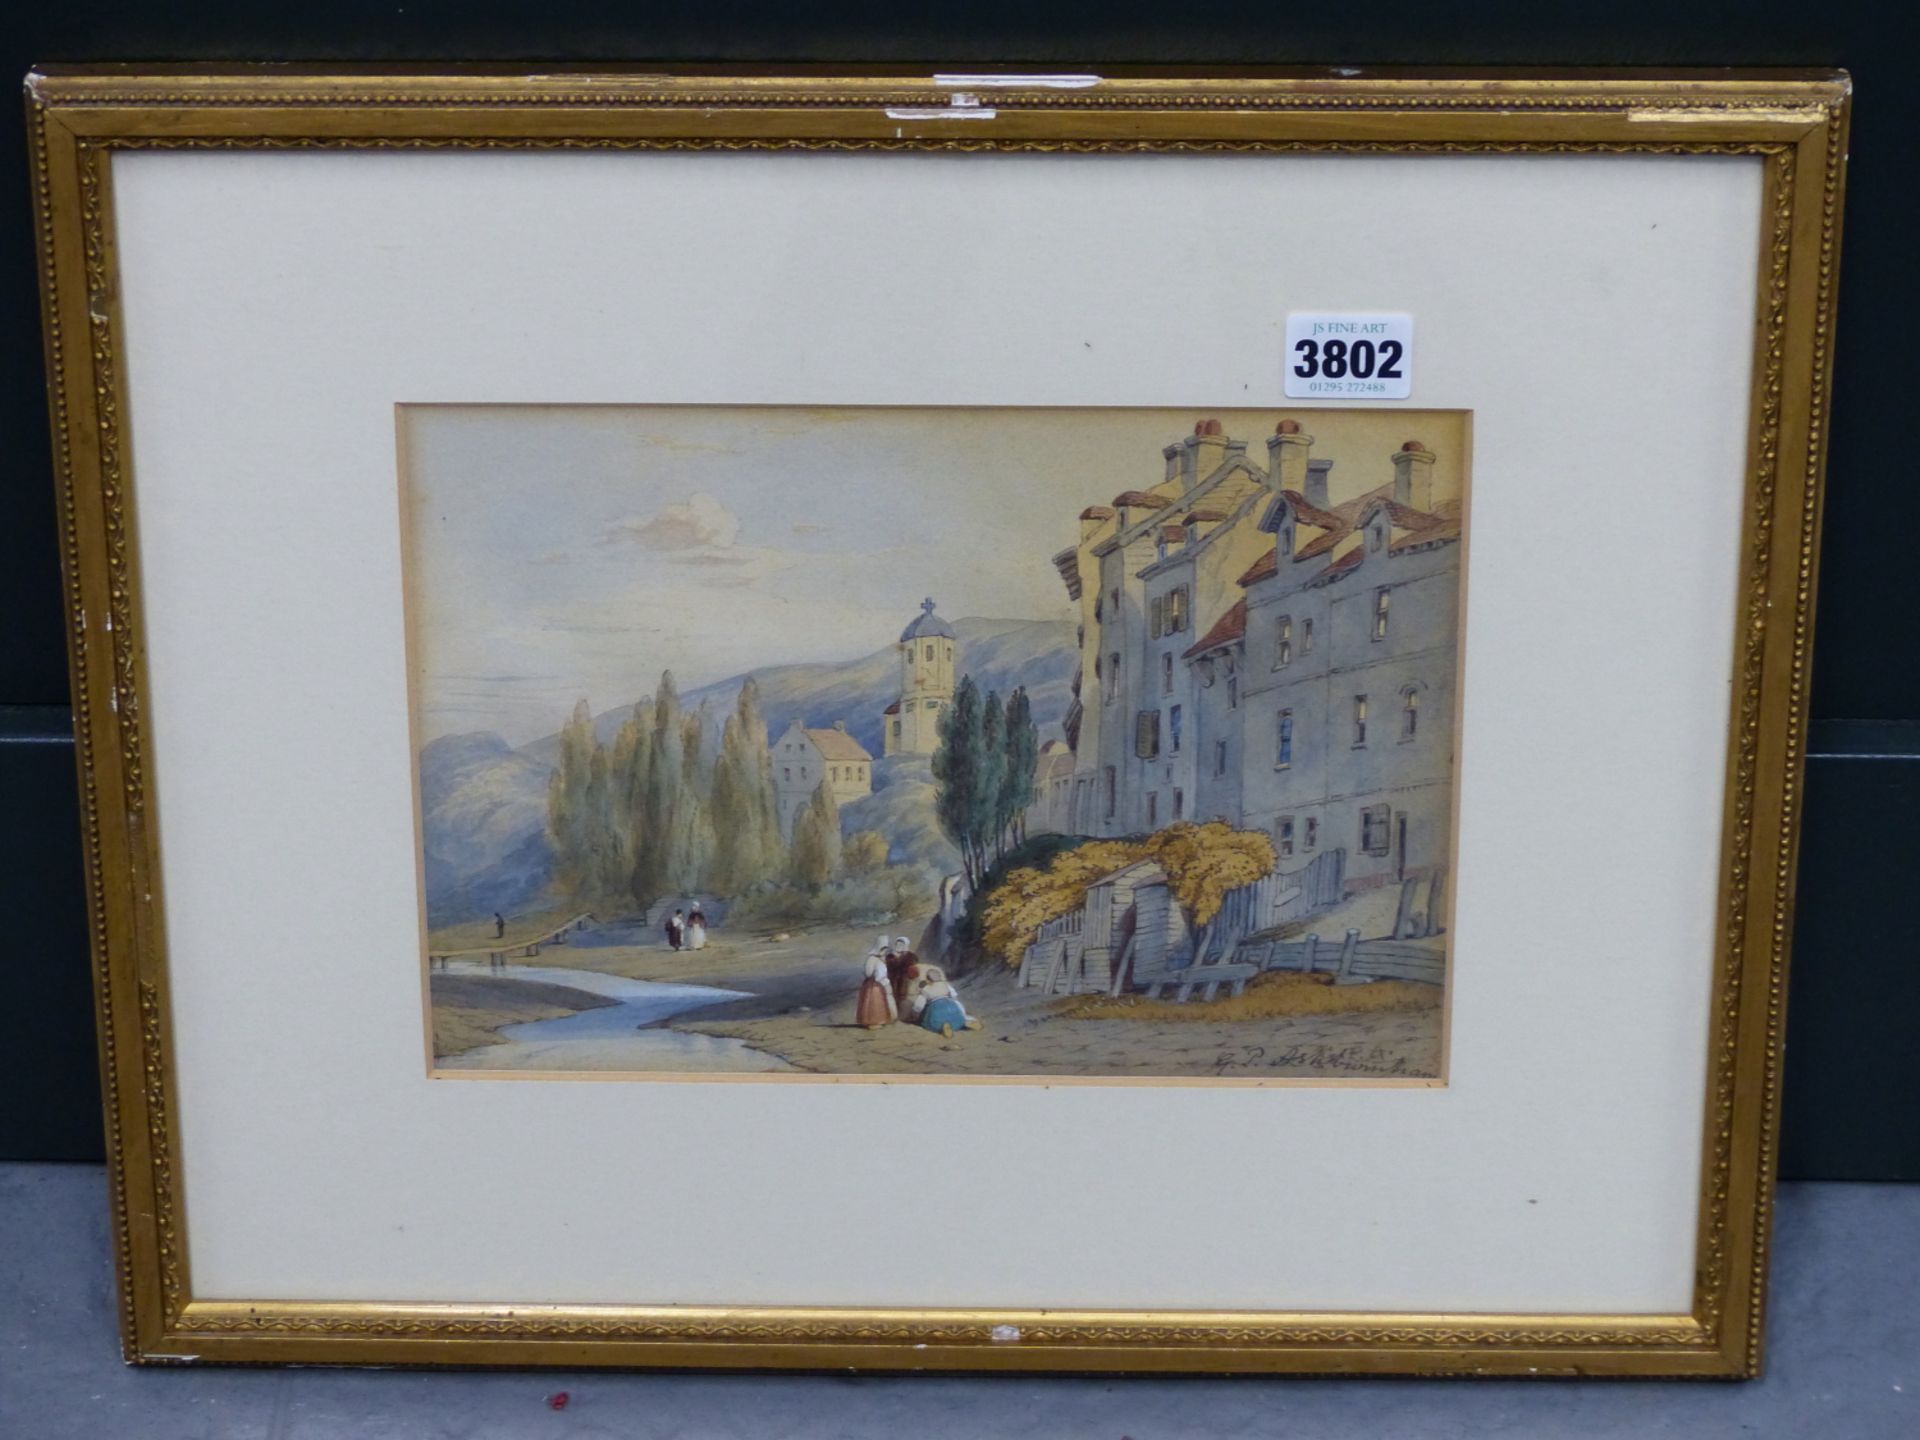 G.P. ASH****** ? (19TH CENTURY). HONFLEUR FRANCE, WATERCOLOUR, MONOGRAMMED AND SIGNED LOWER RIGHT ( - Image 5 of 6